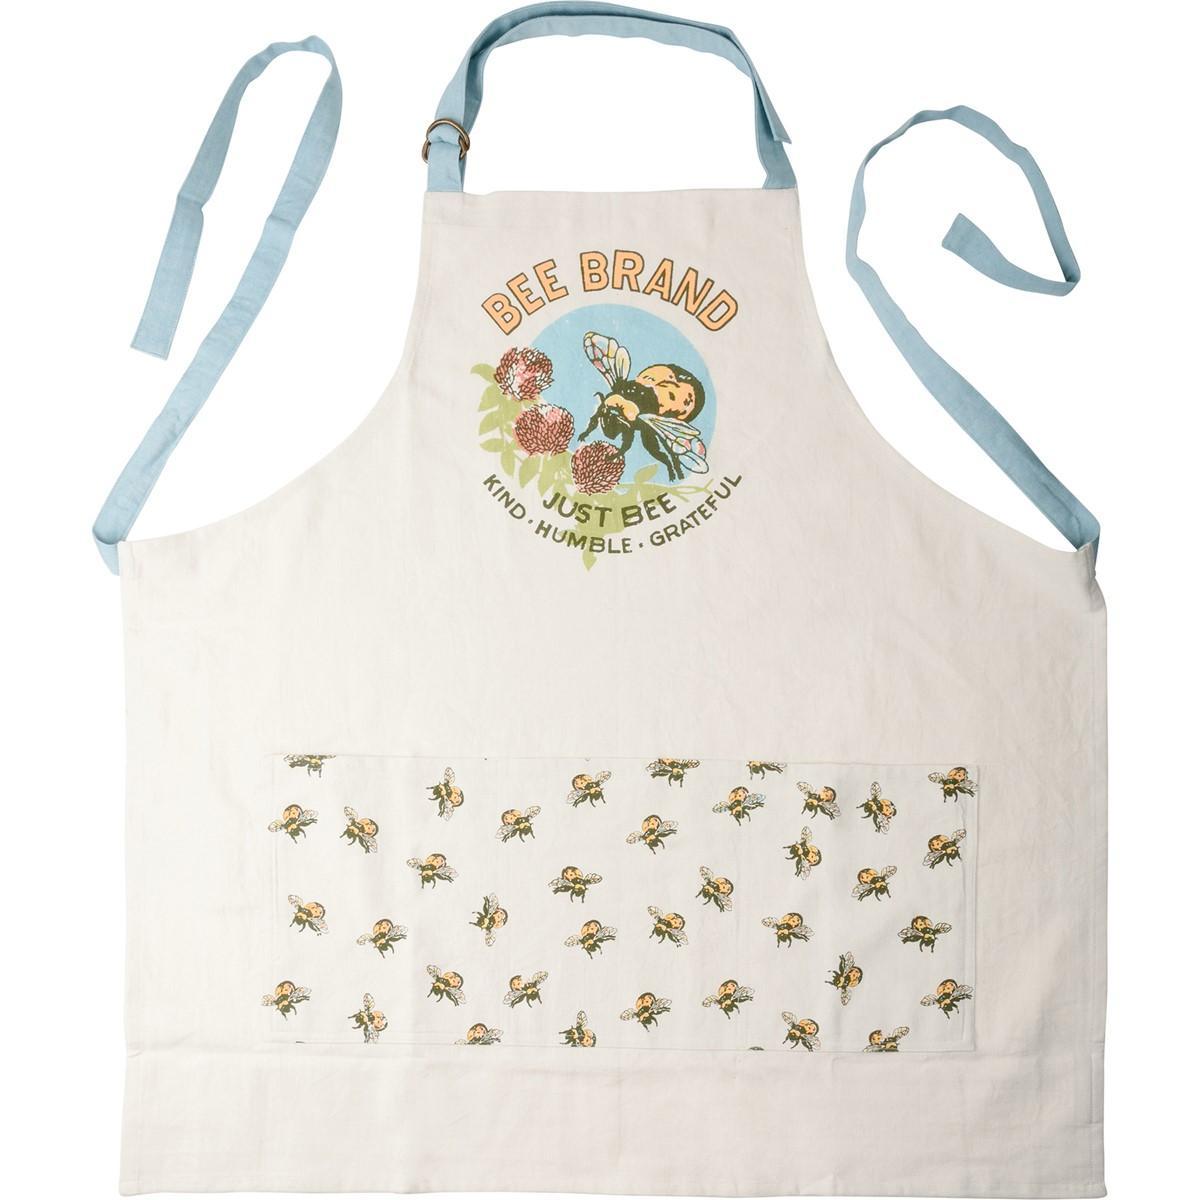 Apron with Pockets | Bee Brand - Just Bee Kind, Humble, Grateful